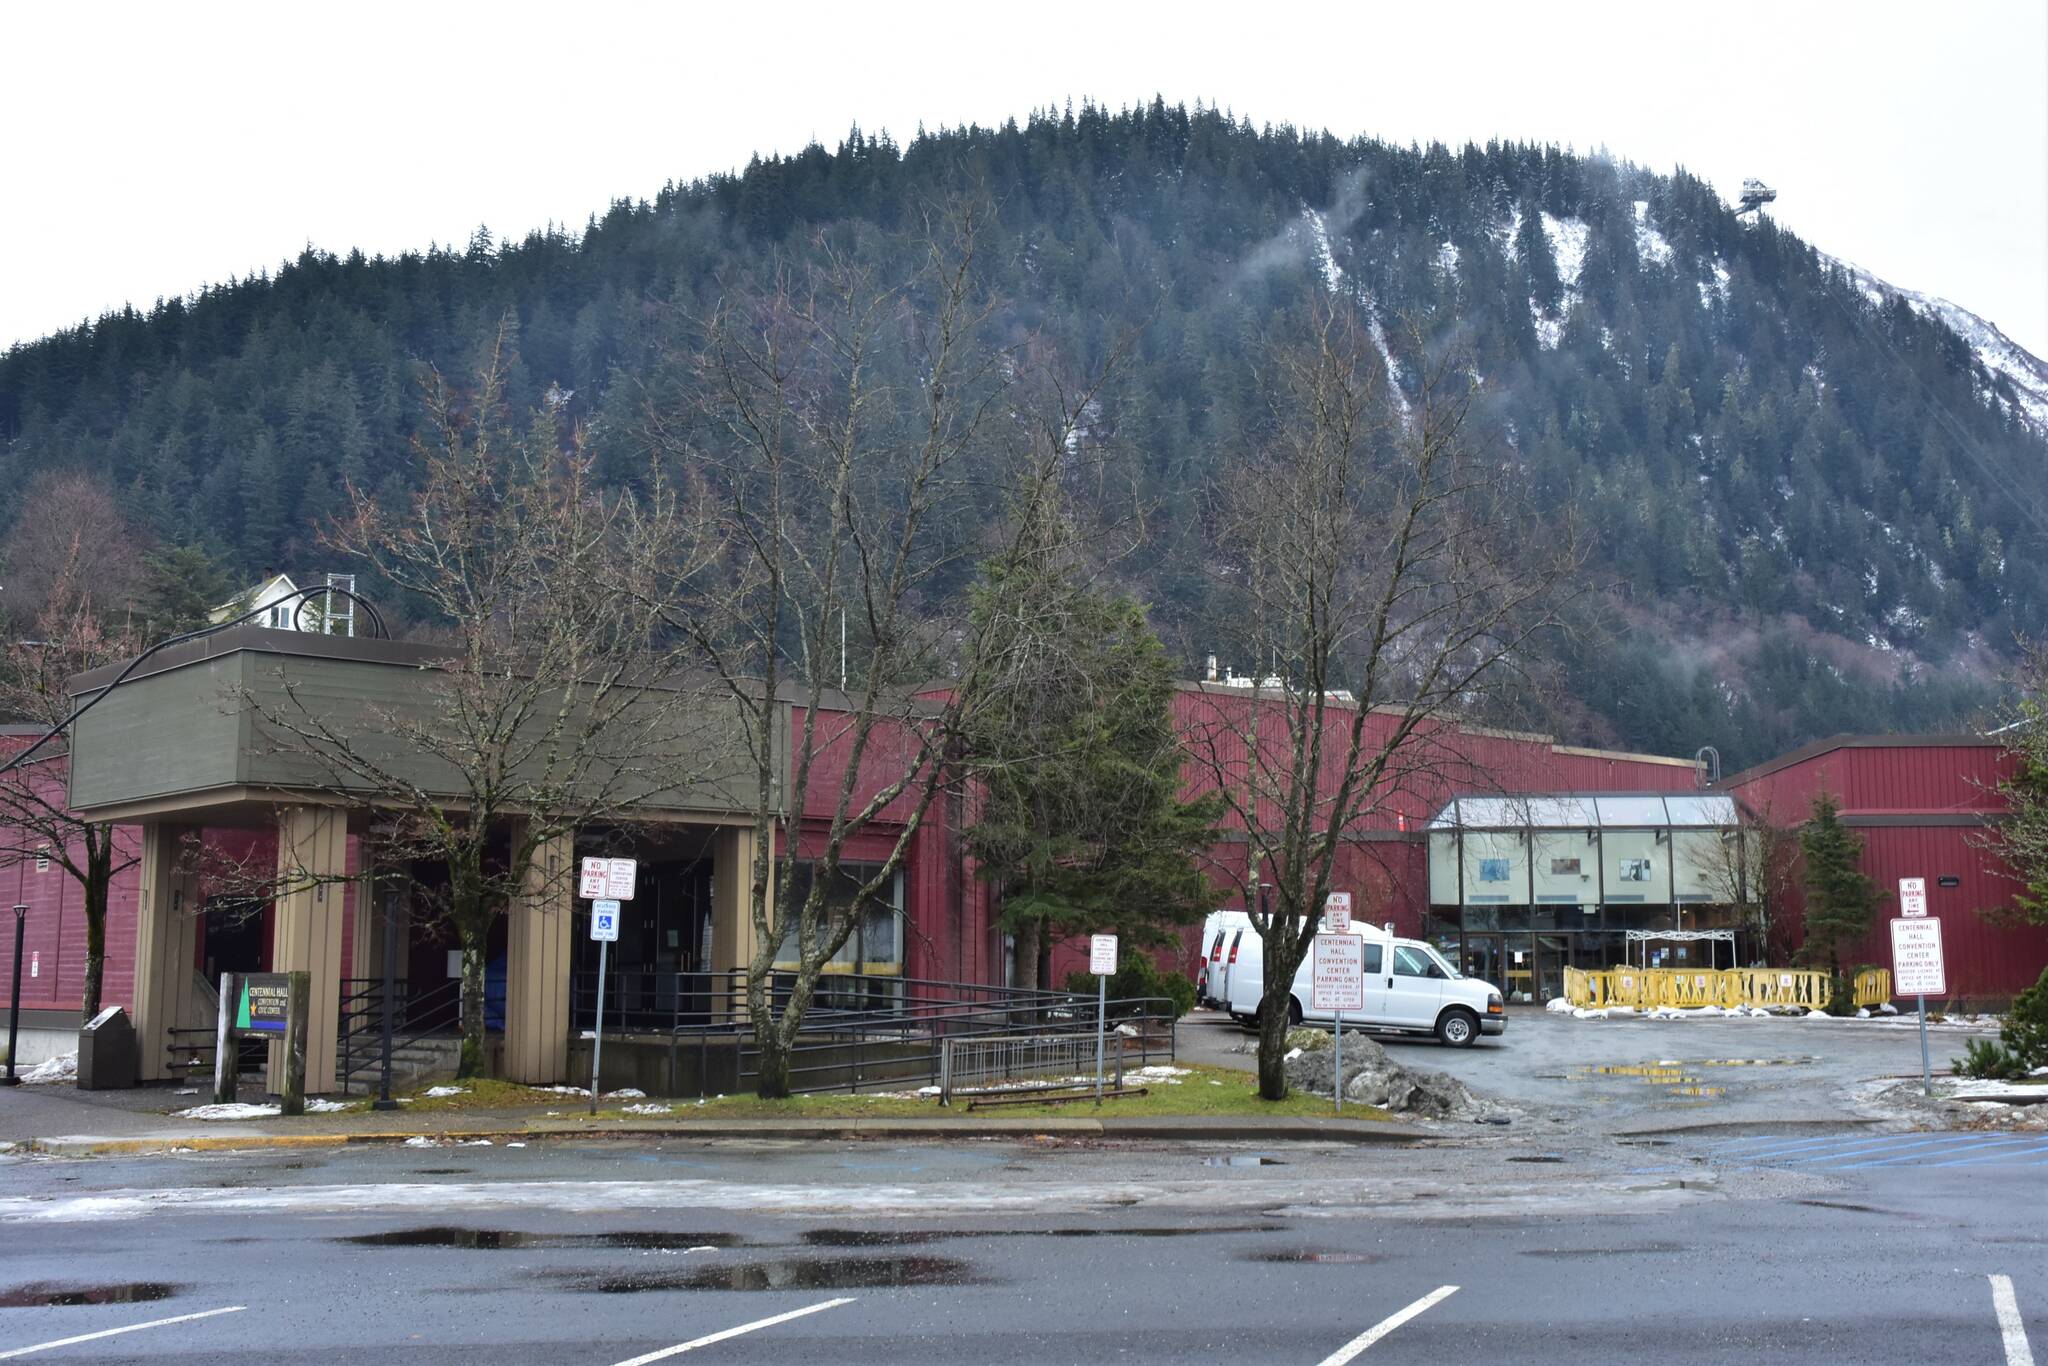 Centennial Hall, seen here, will host the 40th annual Juneau Public Market along with the Juneau Arts and Culture Center on Nov. 25-27. (Peter Segall / Juneau Empire)